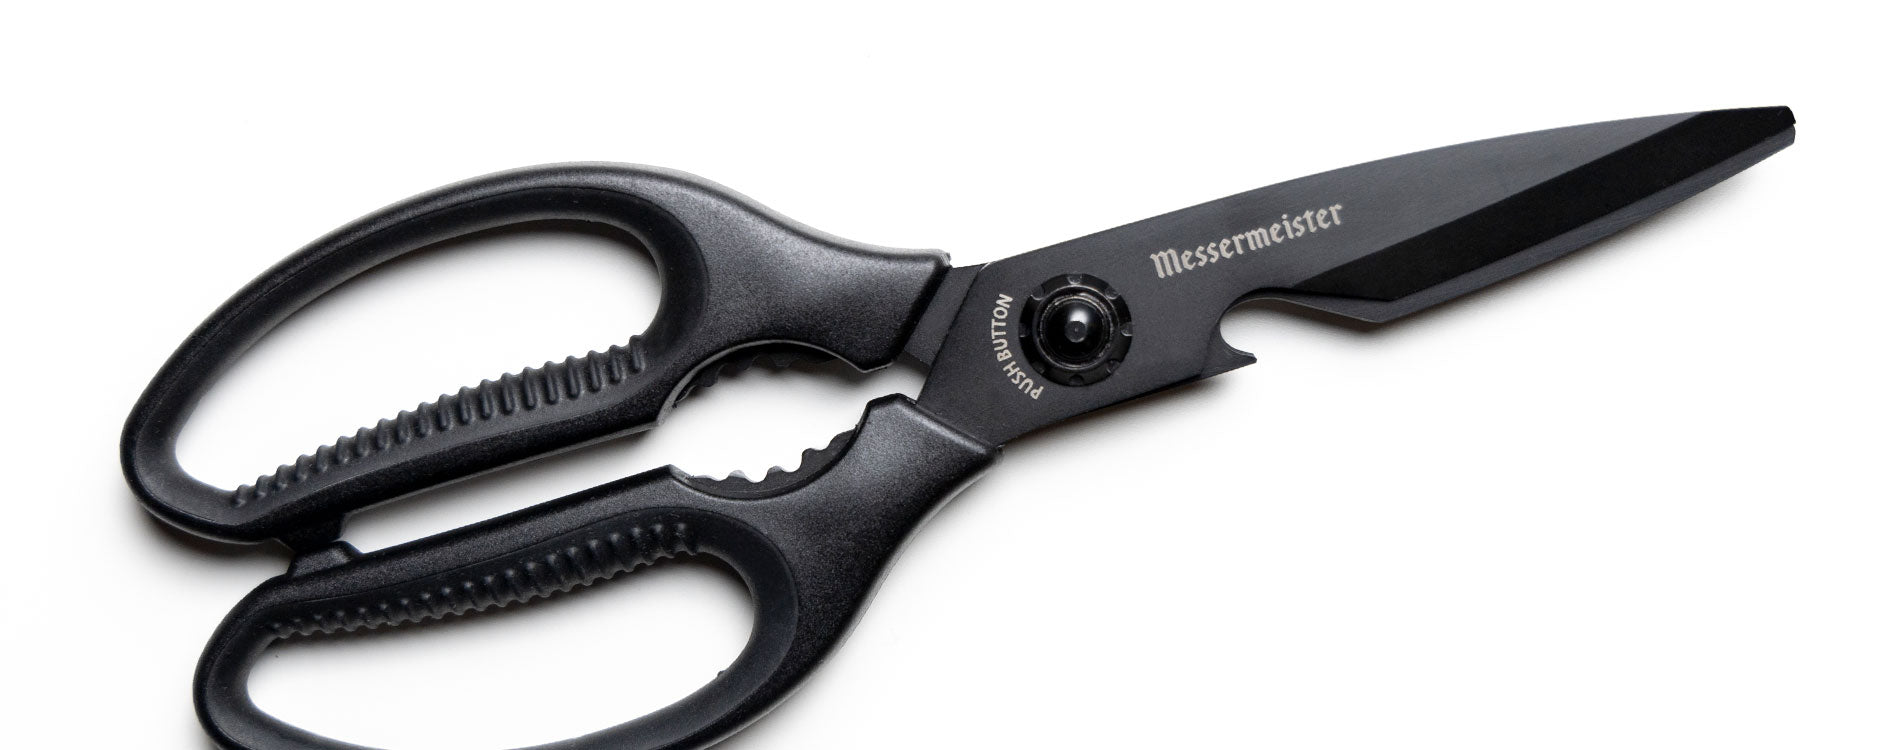 Better in black! Messermeister's NEW 9 Inch Push Button Shears!